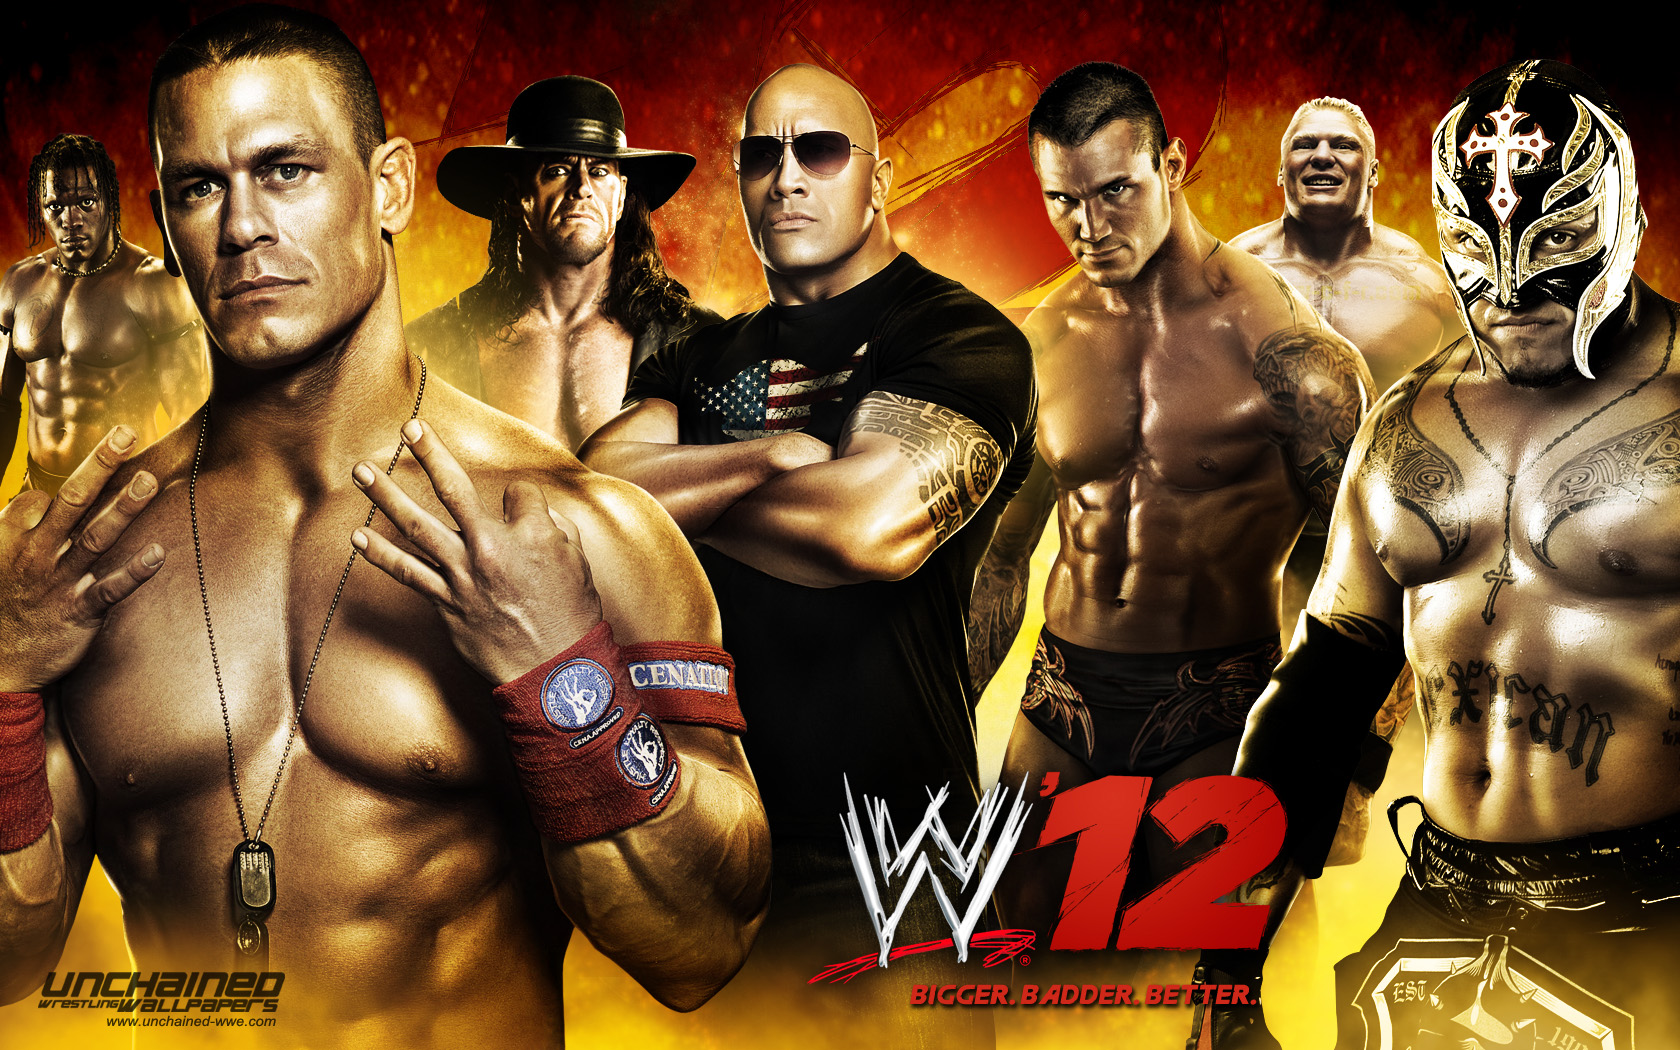  wwe wallpapers iphone 5  HD Photo Wallpaper Collection HD WALLPAPERS